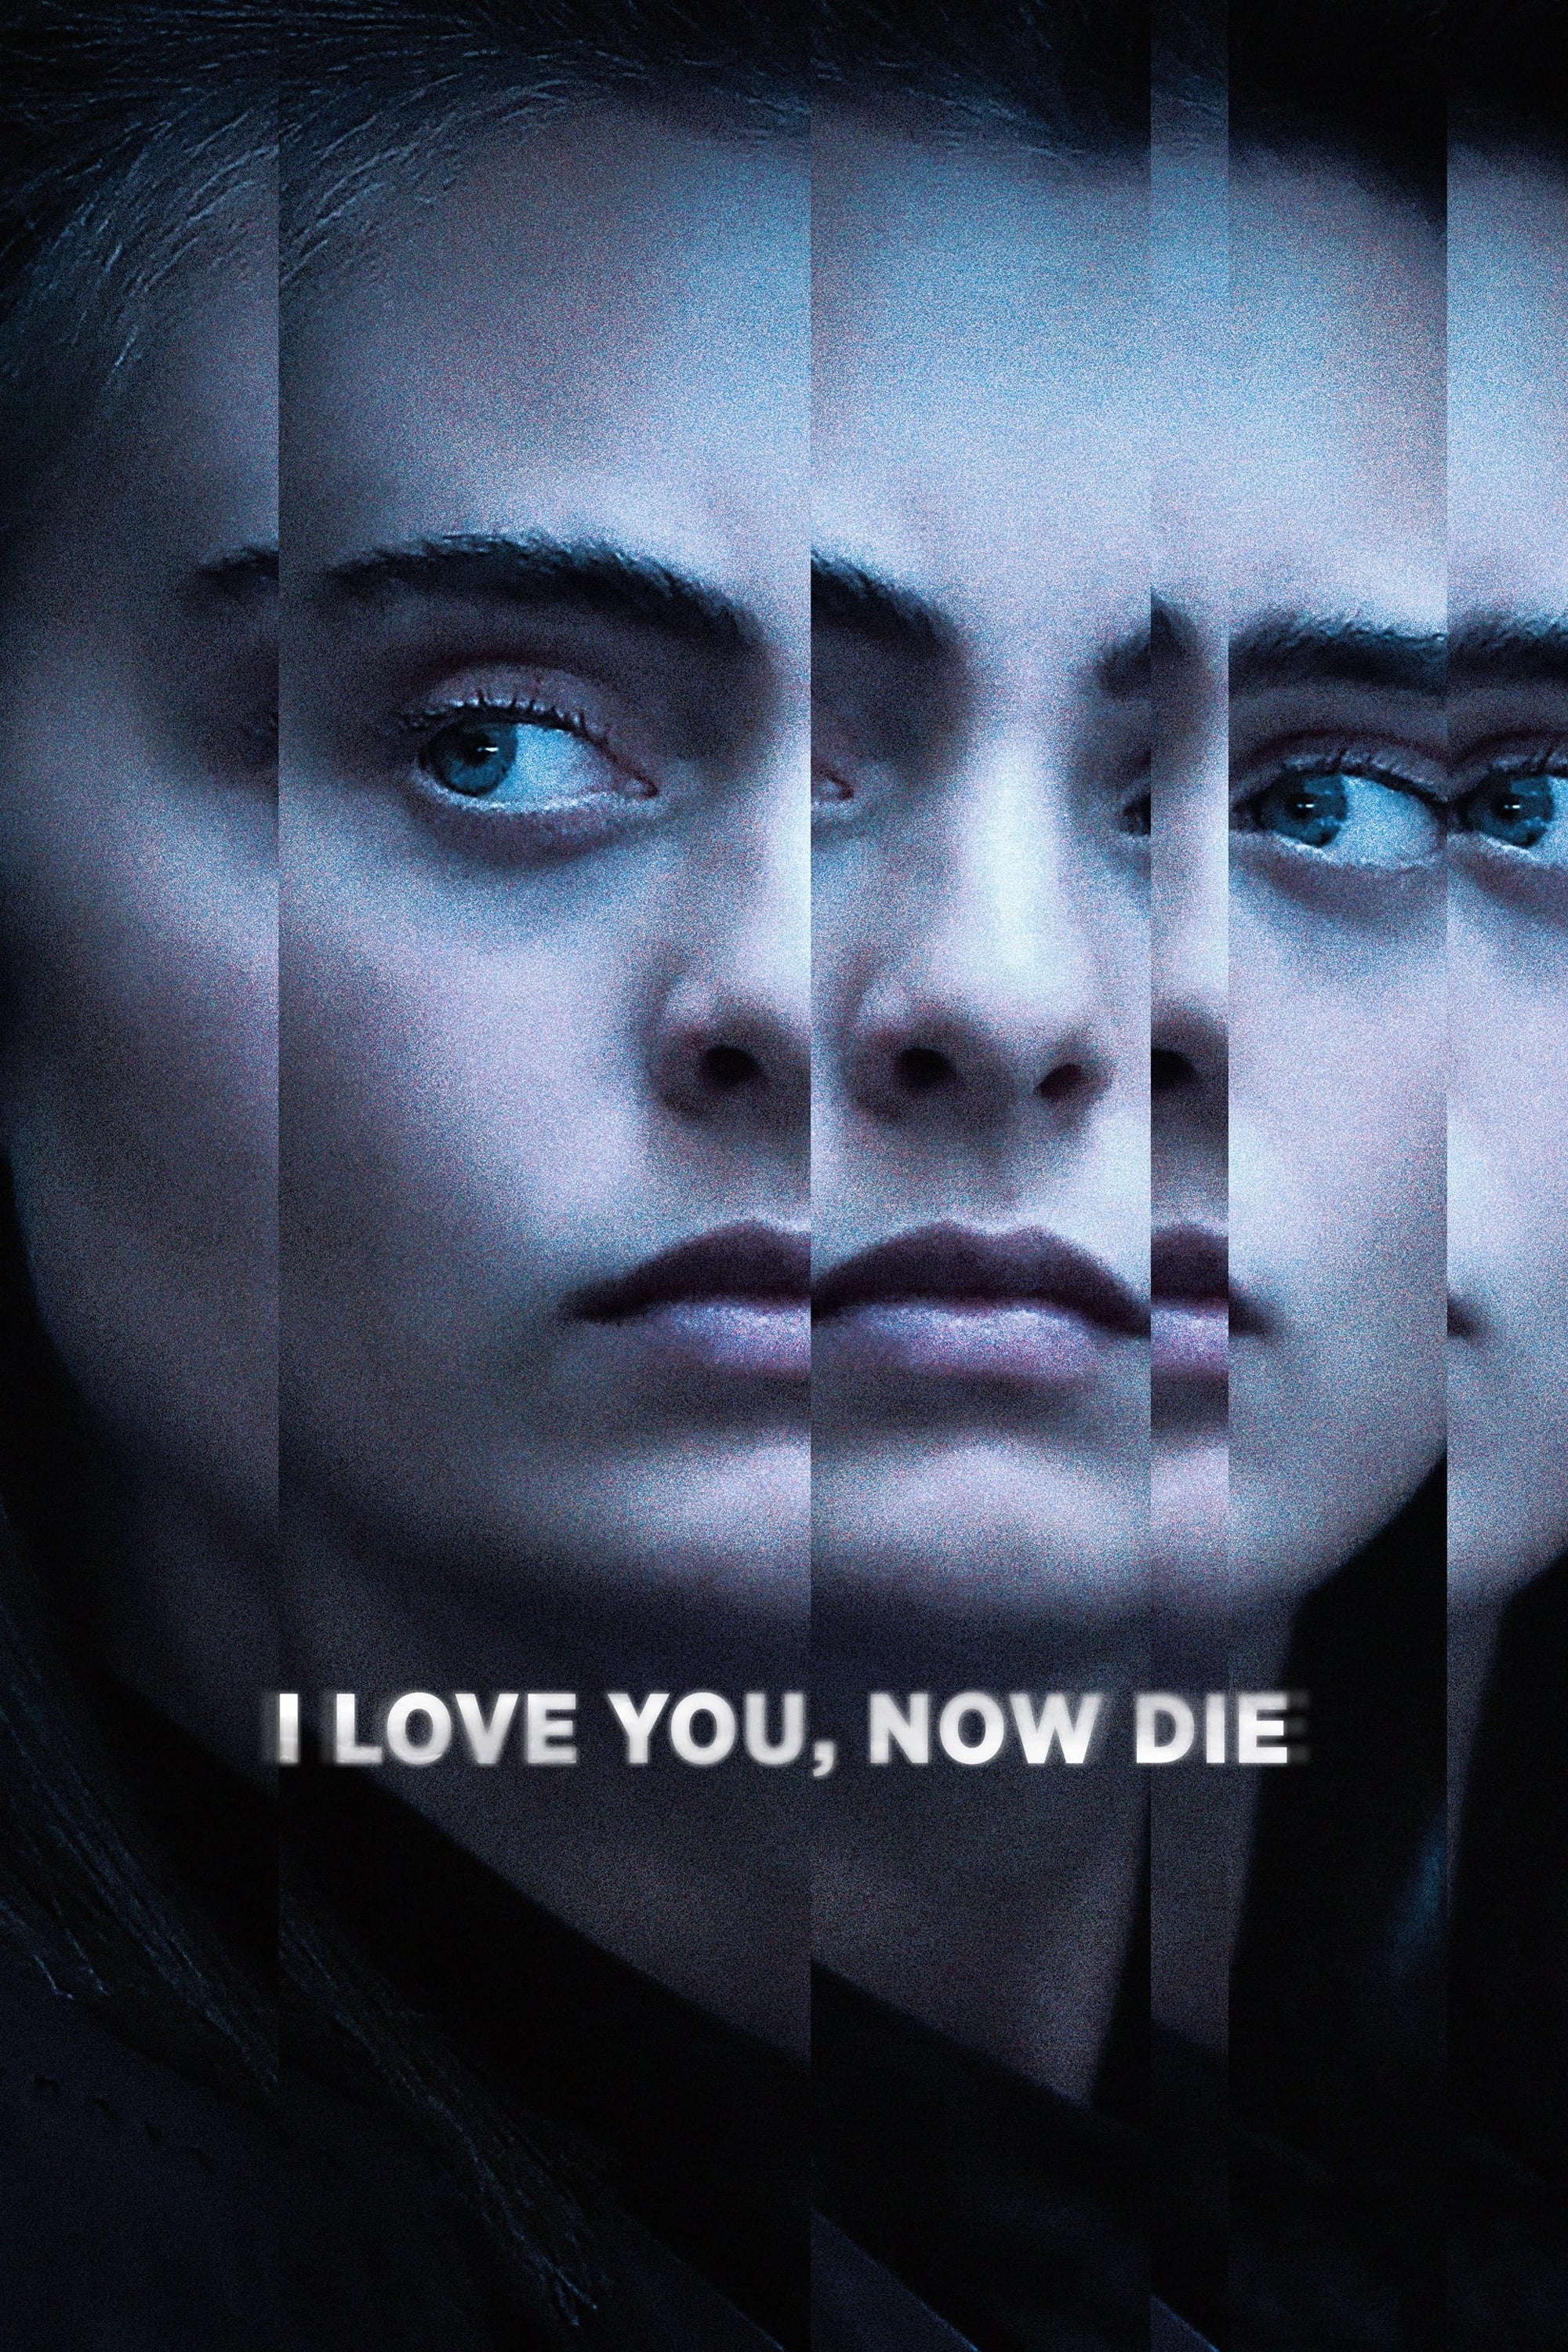 I Love You, Now Die: The Commonwealth v. Michelle Carter TV Shows About Dating